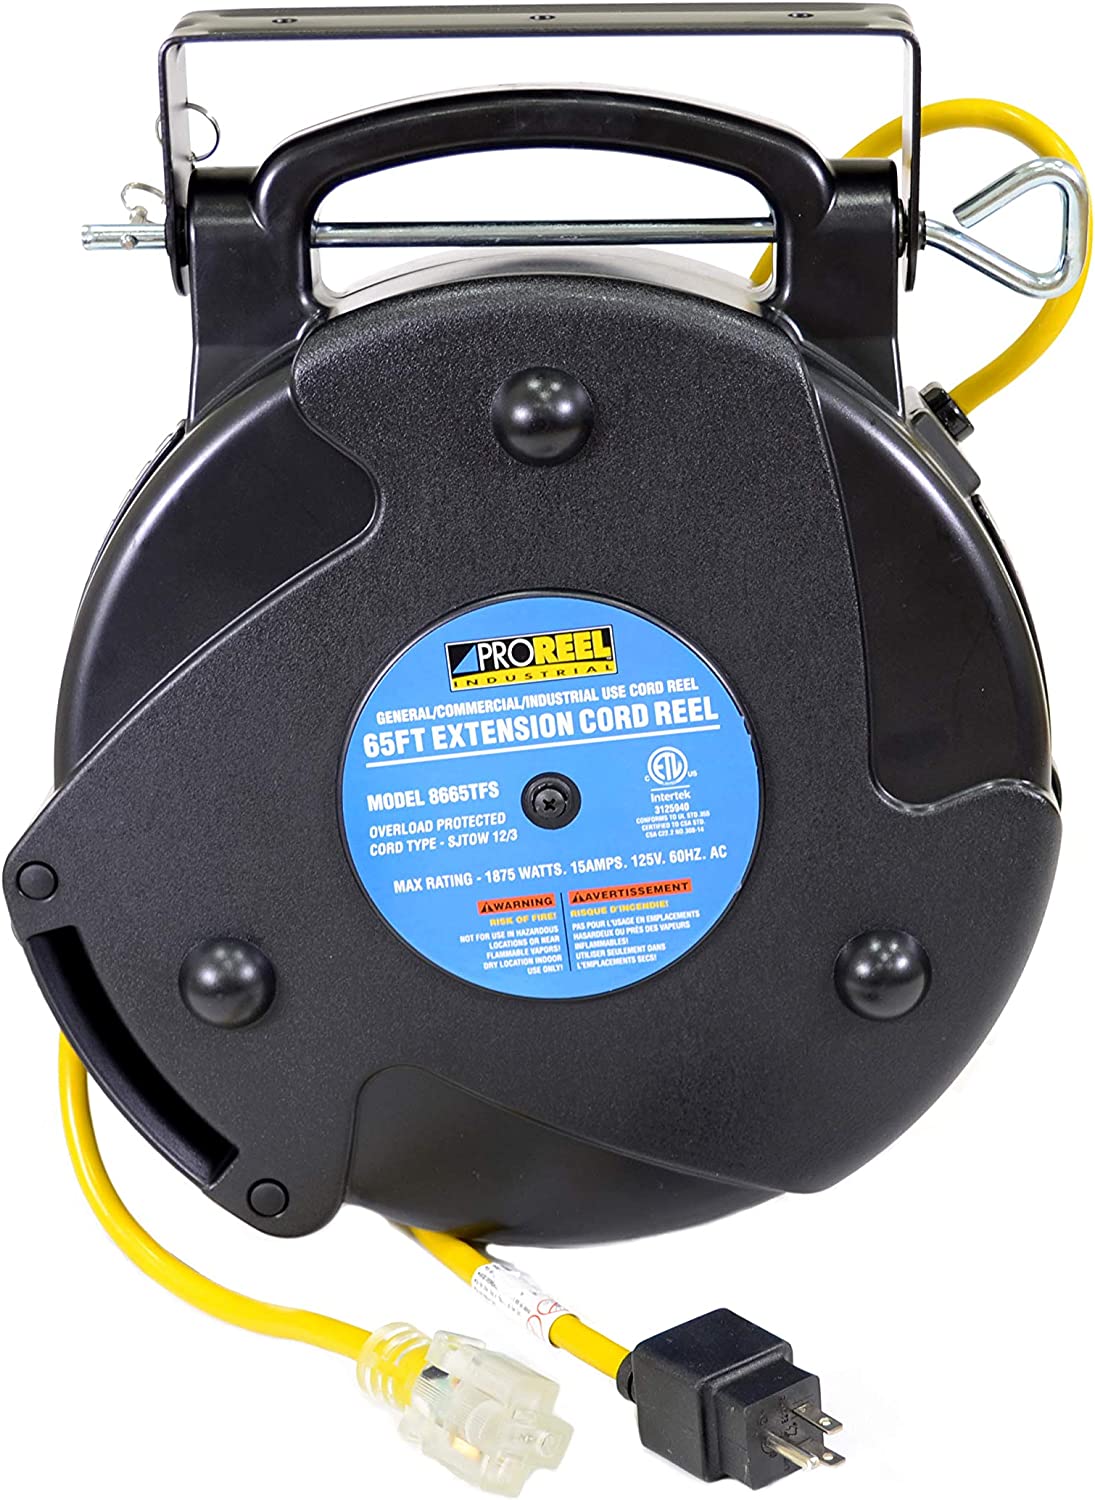 sponsored Bad luck encounter industrial extension cord reel 